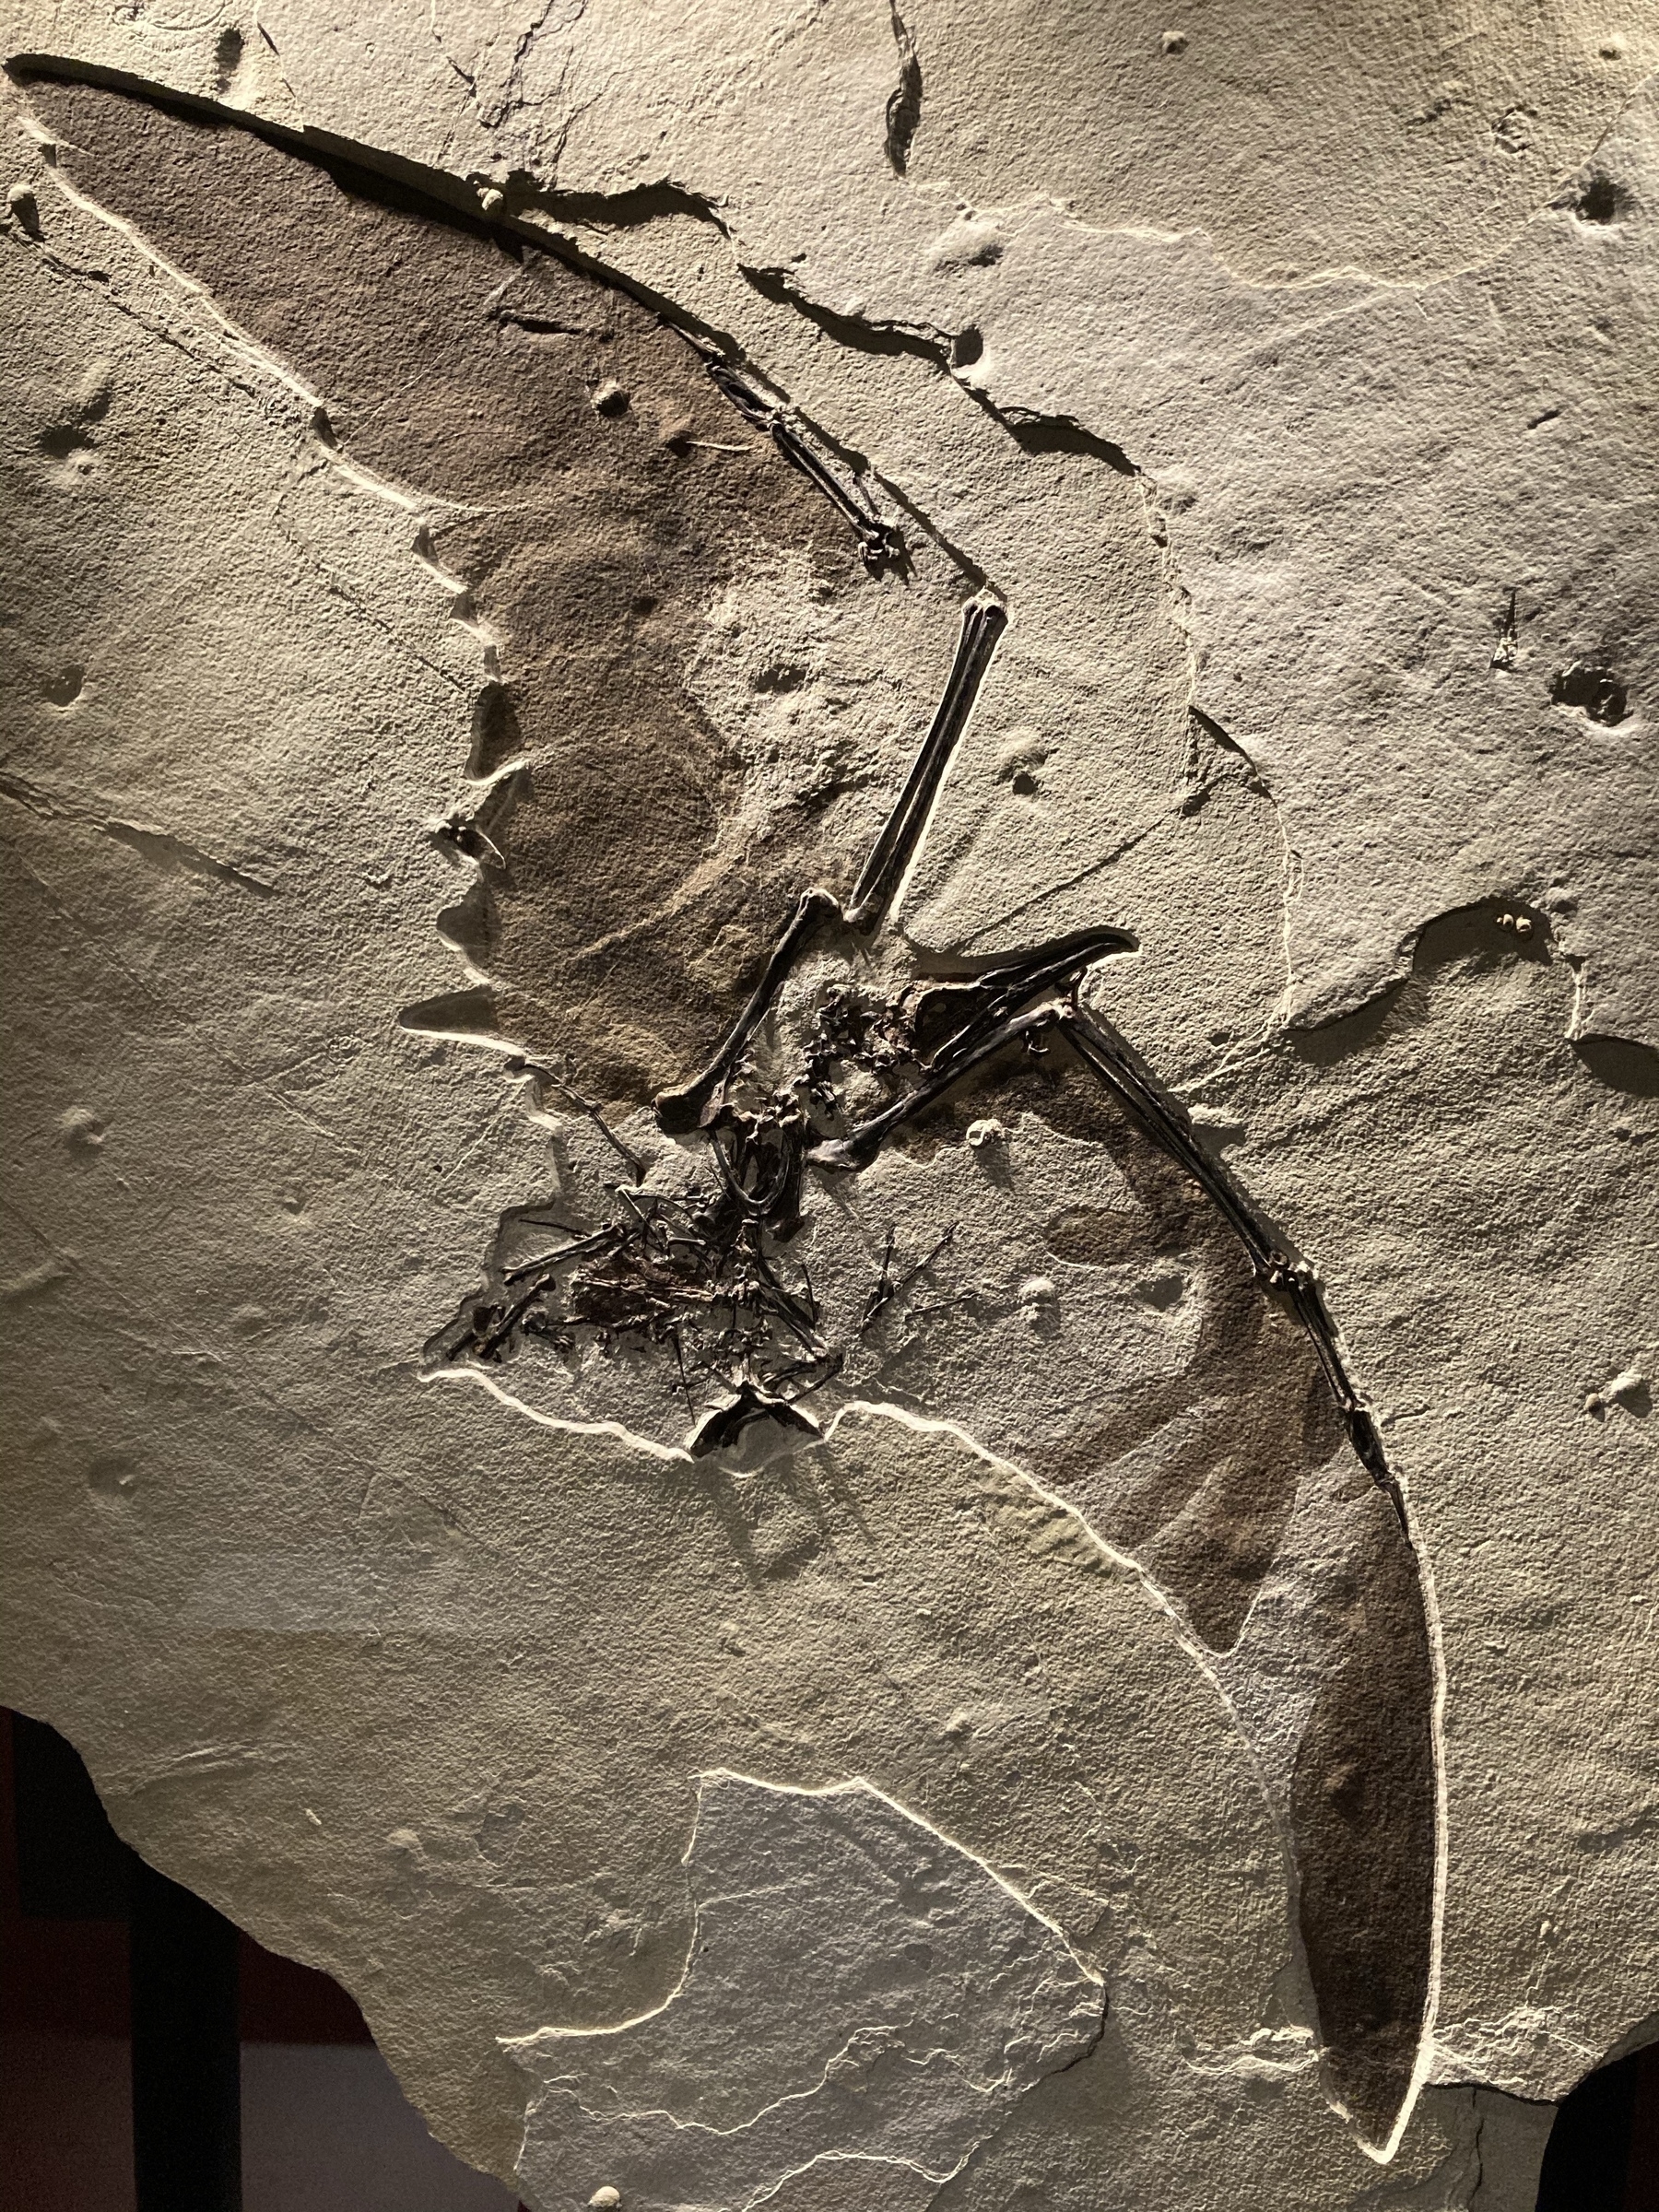 Fossilized winged creature